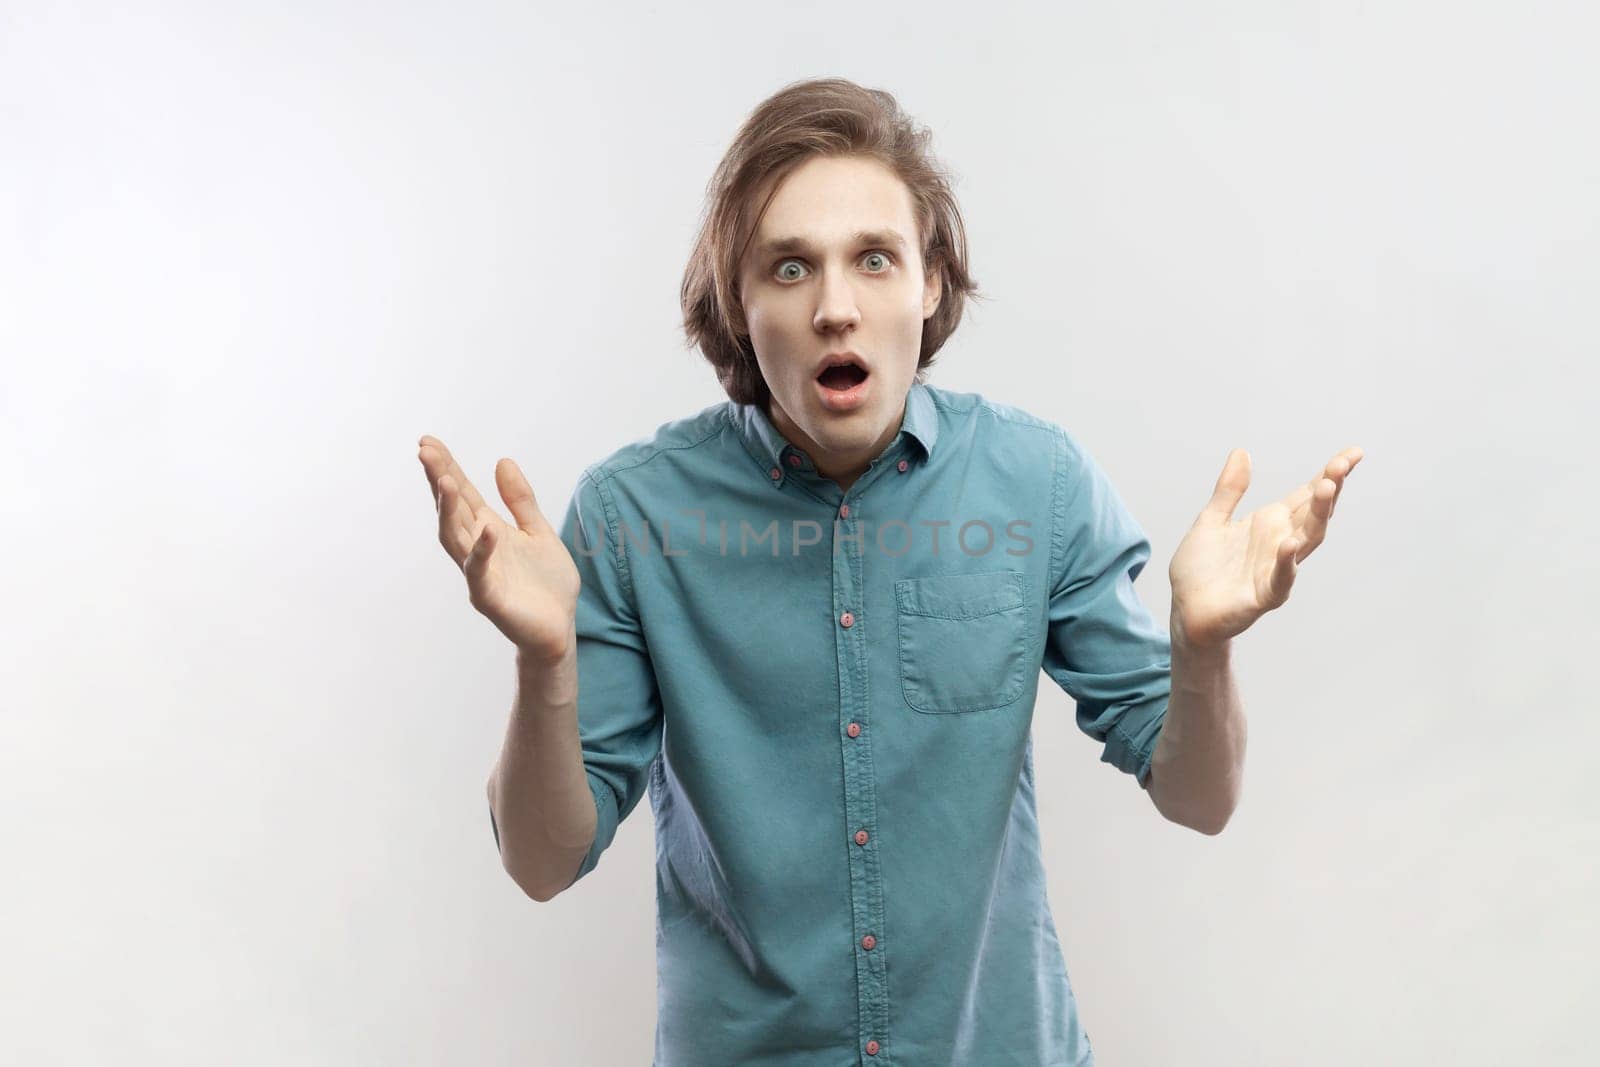 Portrait of shocked excited worried young man raised his arms, looking at camera, sees something unbelievable, saying wow, wearing blue shirt. Indoor studio shot isolated on gray background.